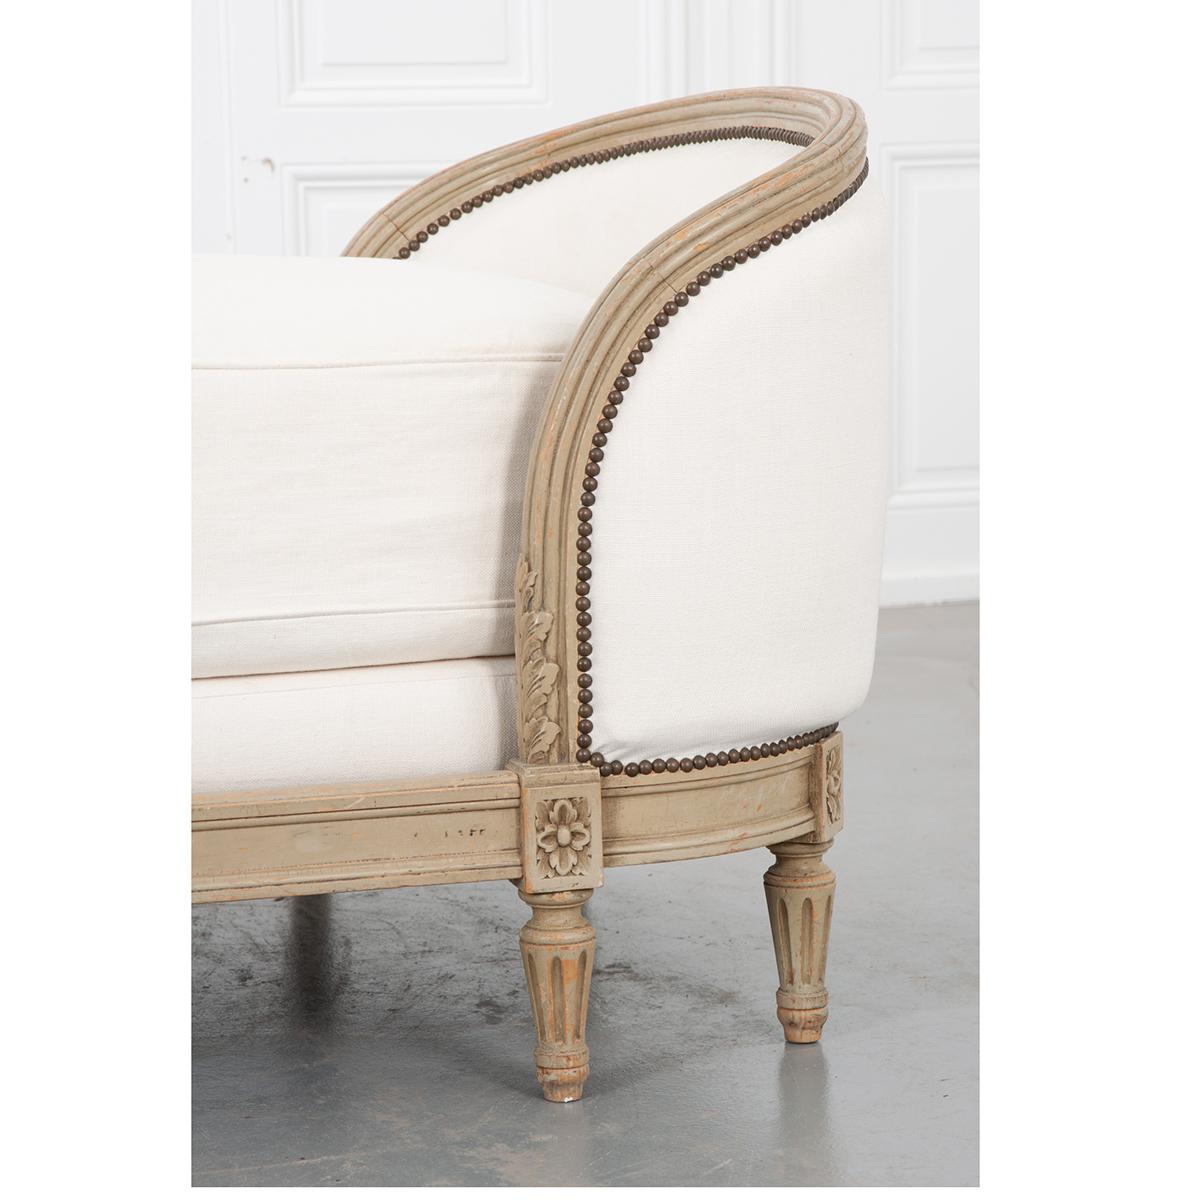 Upholstery 19th Century French Louis XVI Daybed